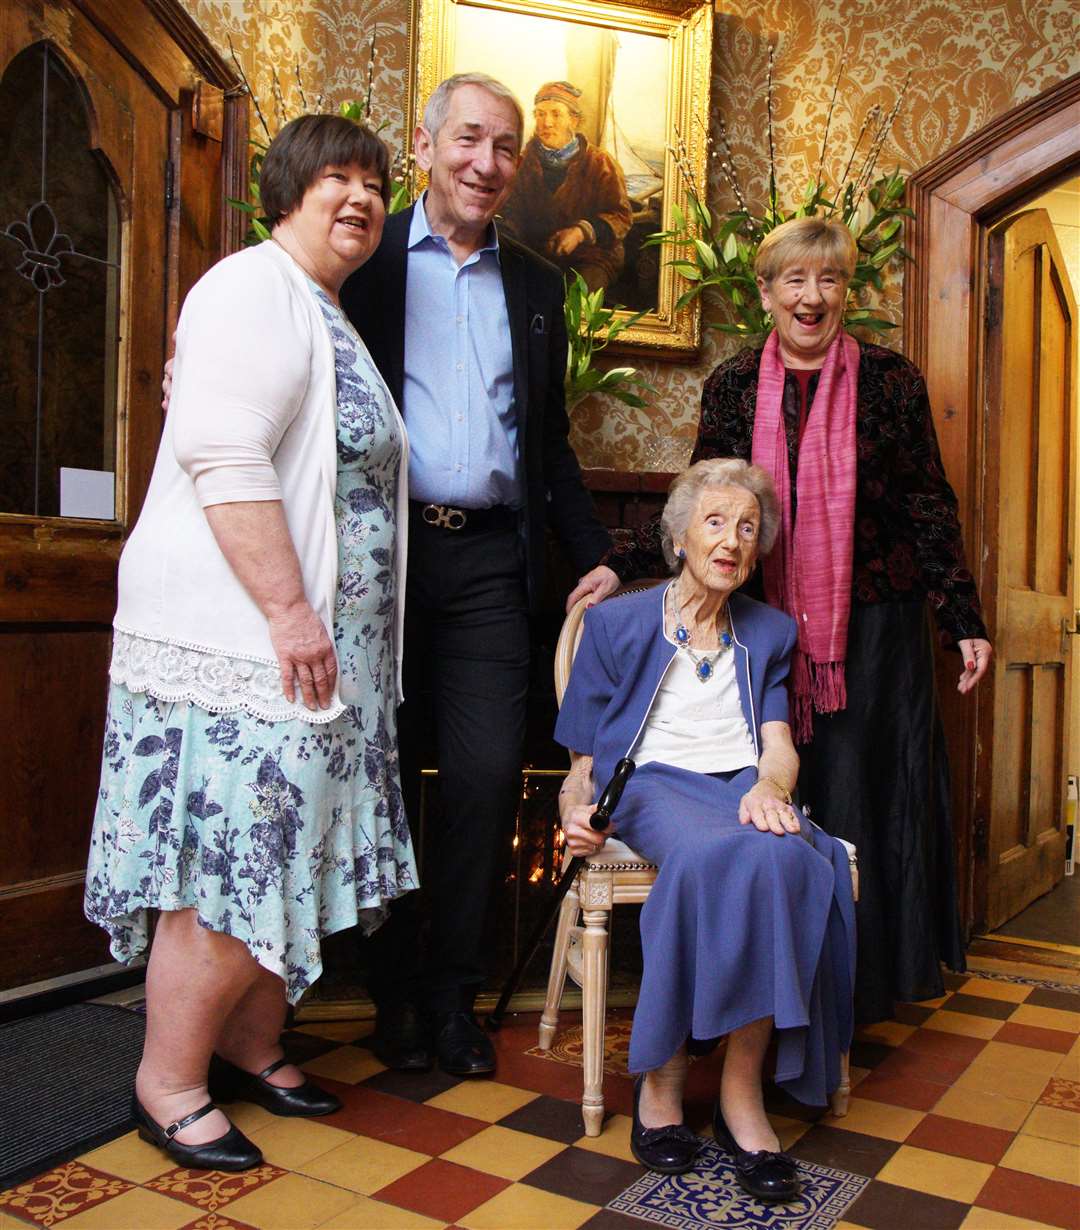 Pat, with her daughters Gail and Vicki and her son Mark